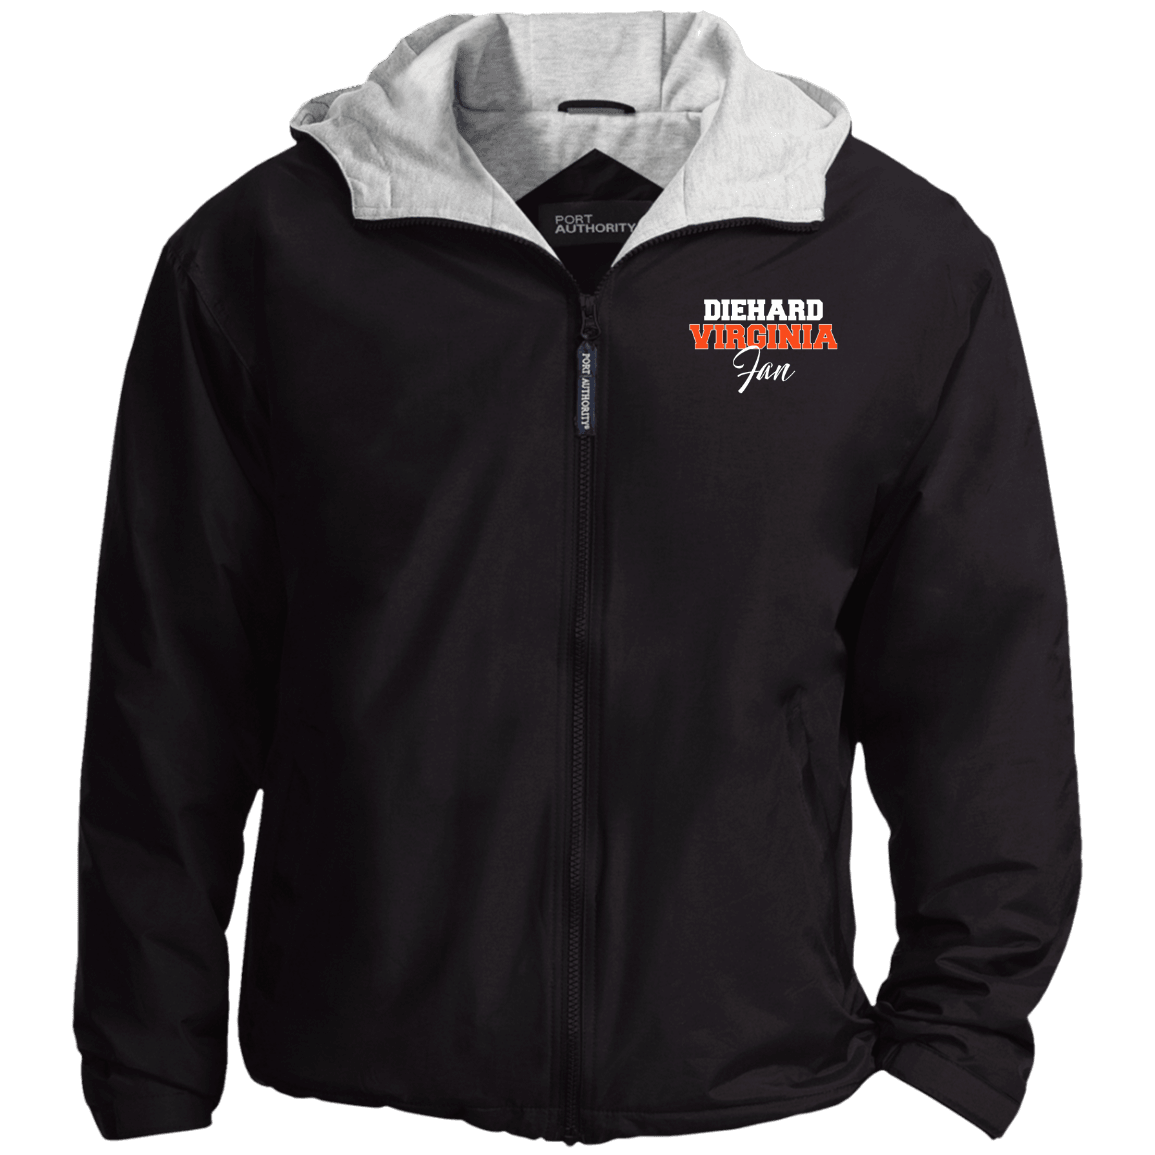 Designs by MyUtopia Shout Out:Diehard Virginia Fan Embroidered Port Authority Team Jacket,Black/Light Oxford / X-Small,Jackets